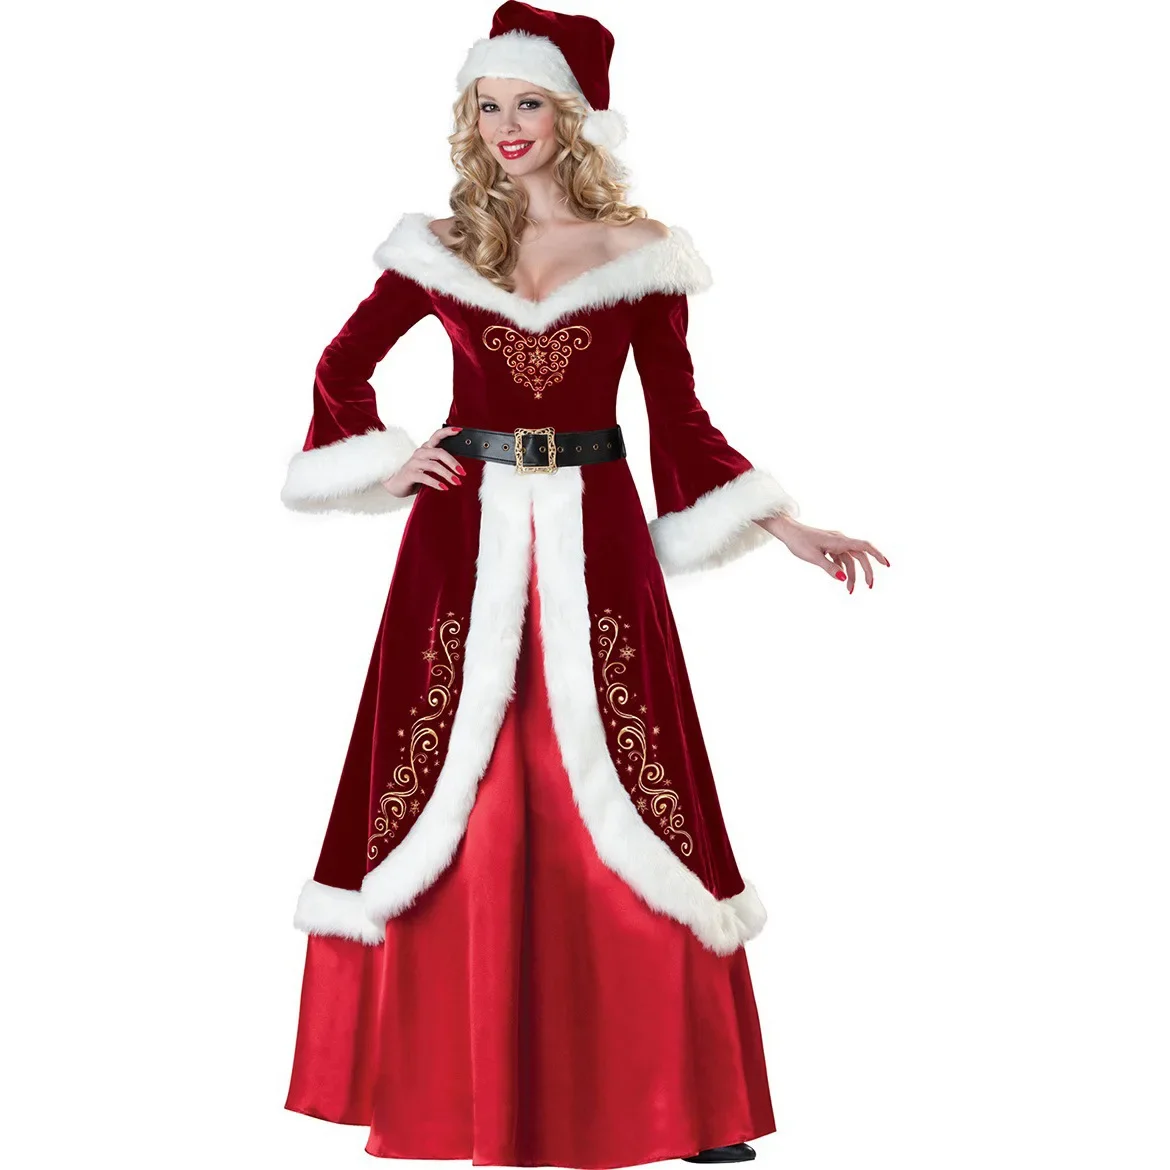 

Deluxe Adult Women Christmas Costume Cosplay Santa Claus Uniform Fancy Dress Santa Clothes Party Sexy Christmas Dress For Lady